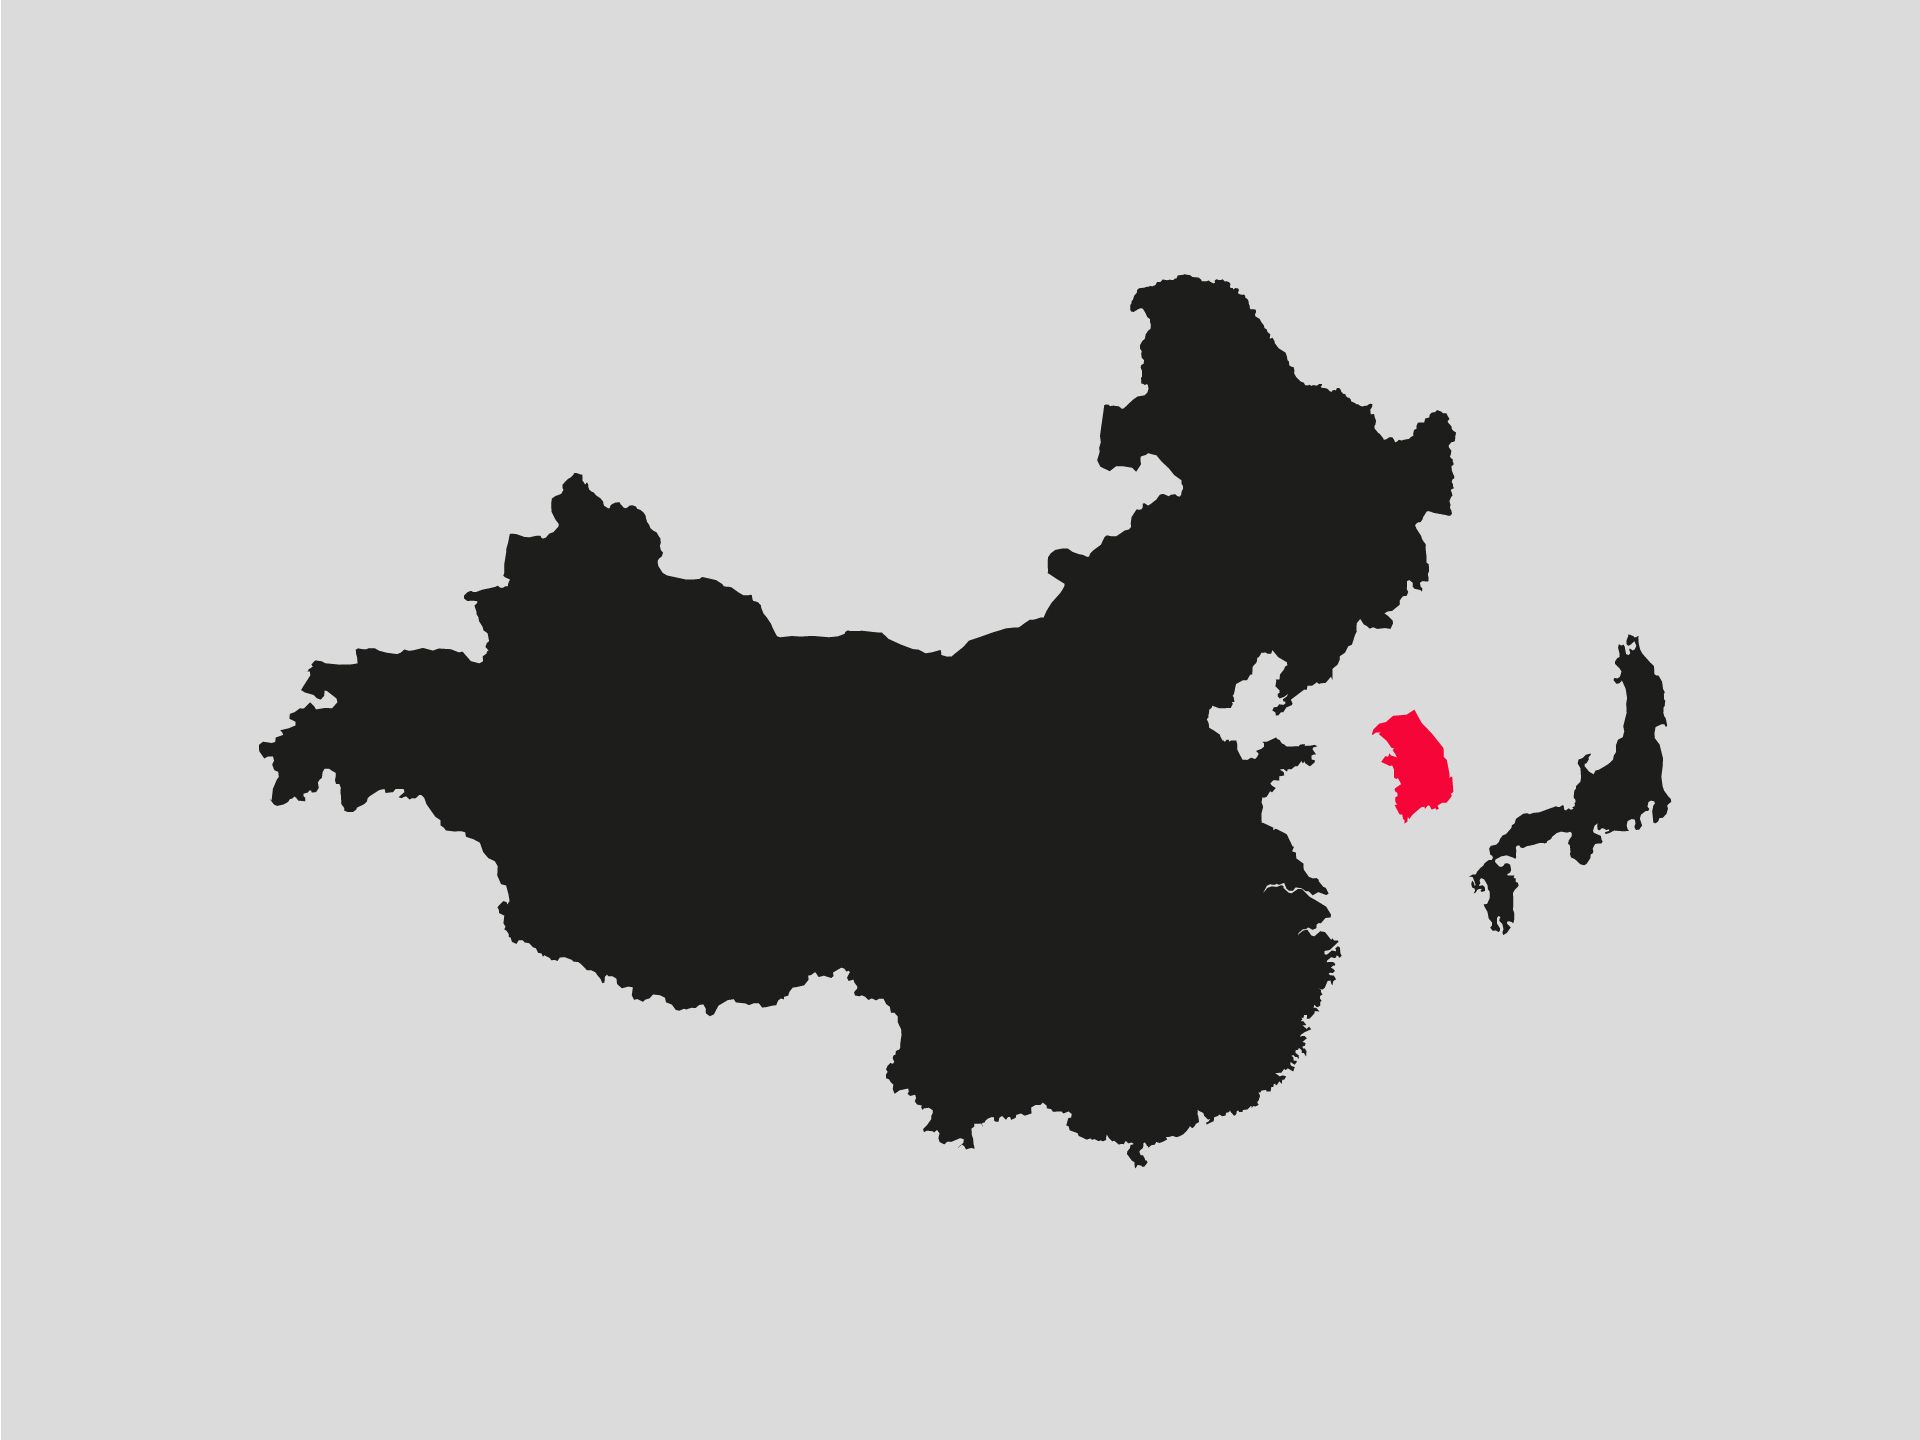 This map shows the outlines of China, South Korea and Japan. South Korea is highlighted in color.